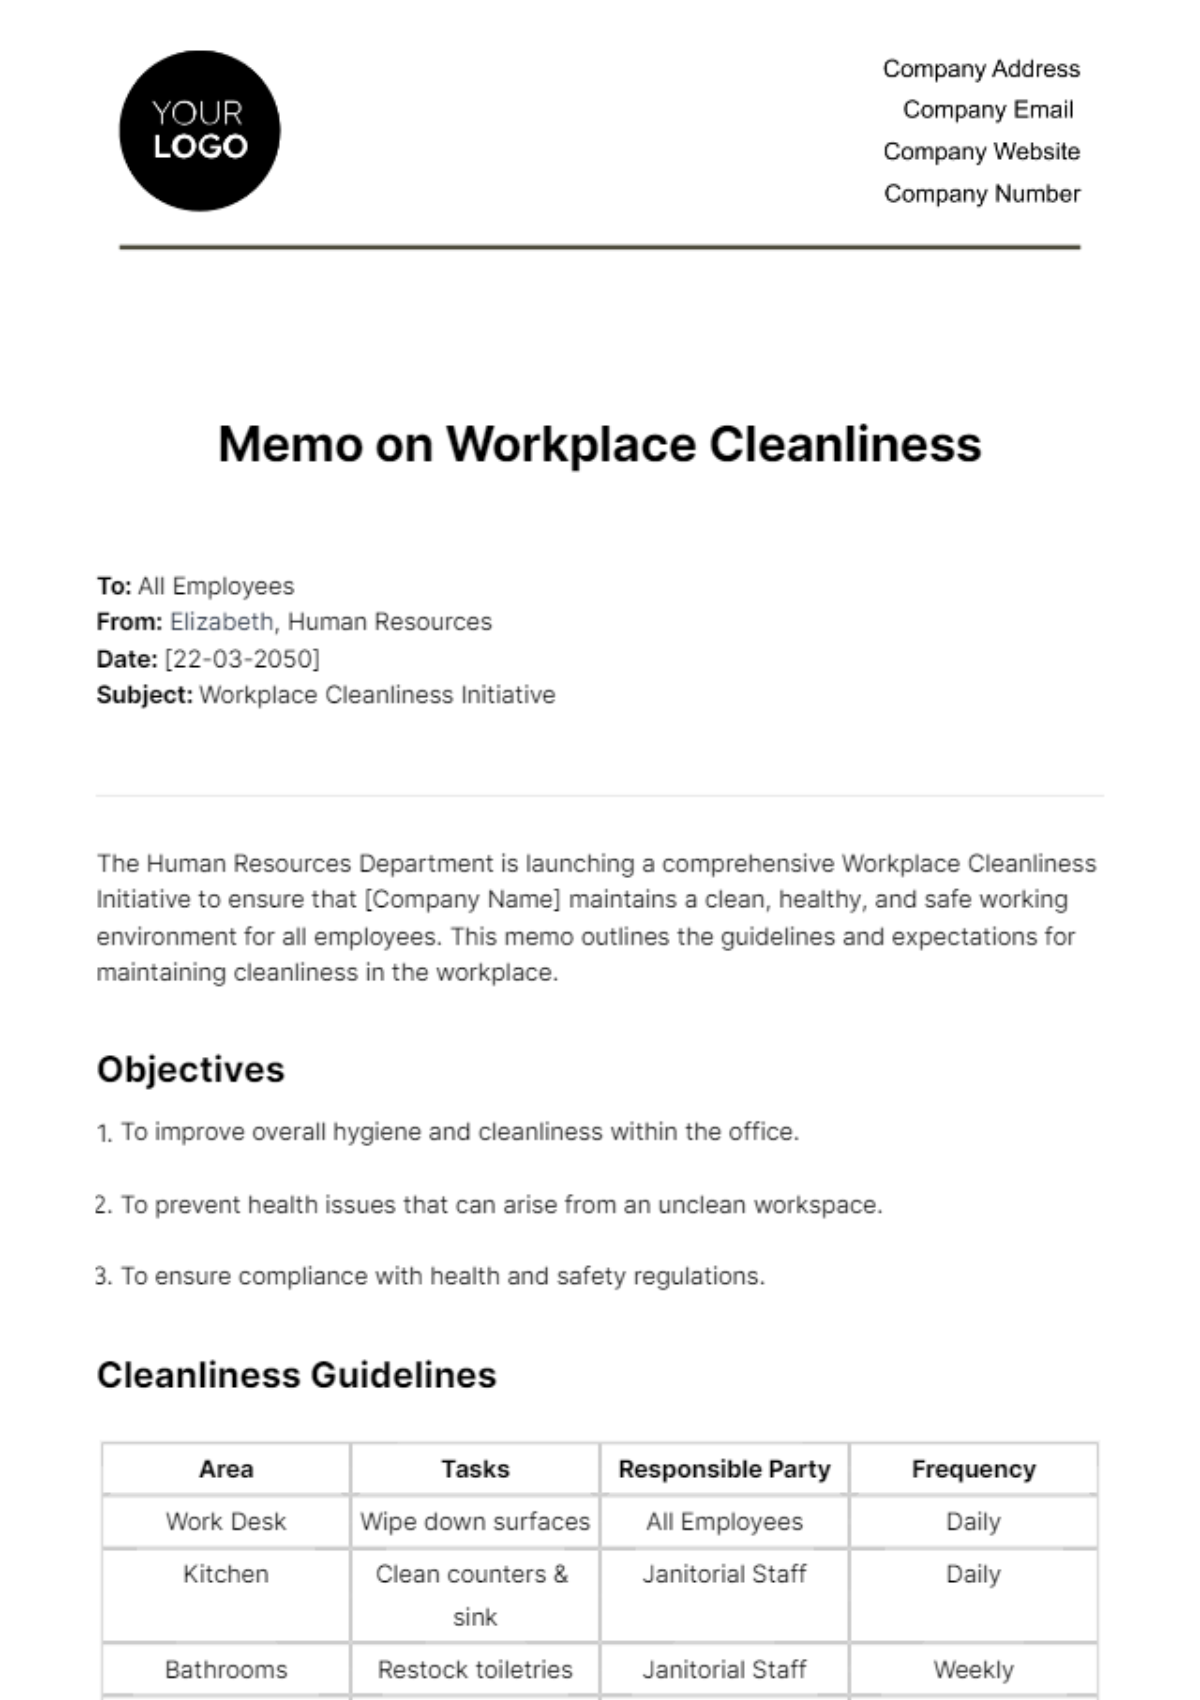 Free Memo on Workplace Cleanliness HR Template